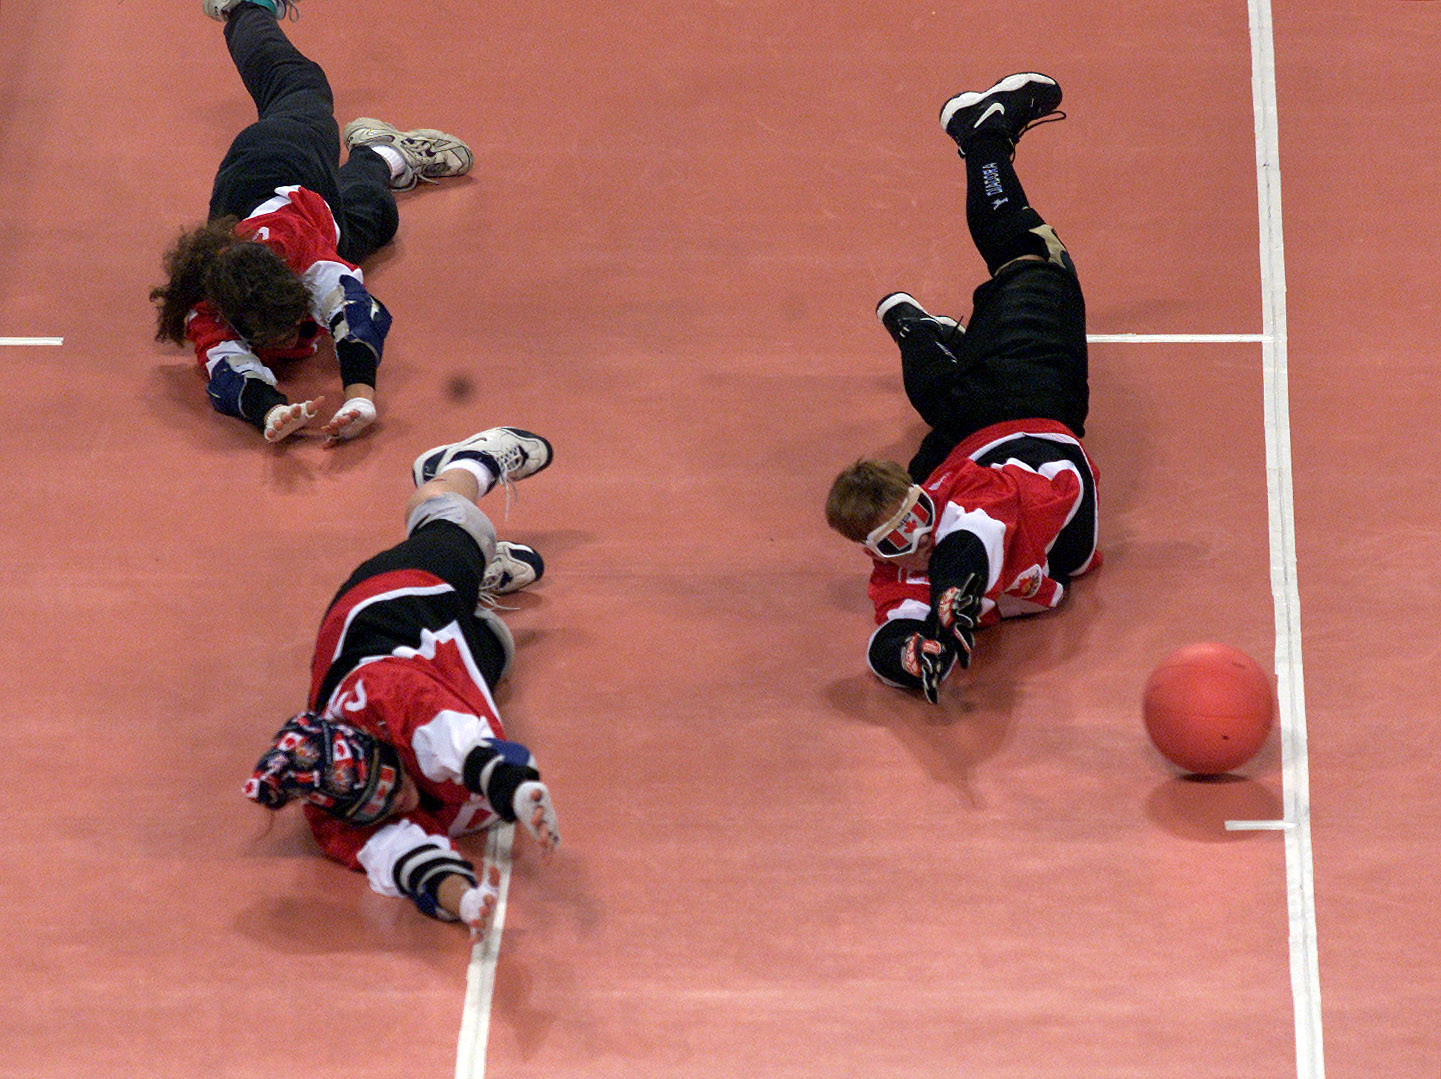 Voting for the Athlete Representative is due to take place during this year's Goalball World Championships in Portugal ©Getty Images